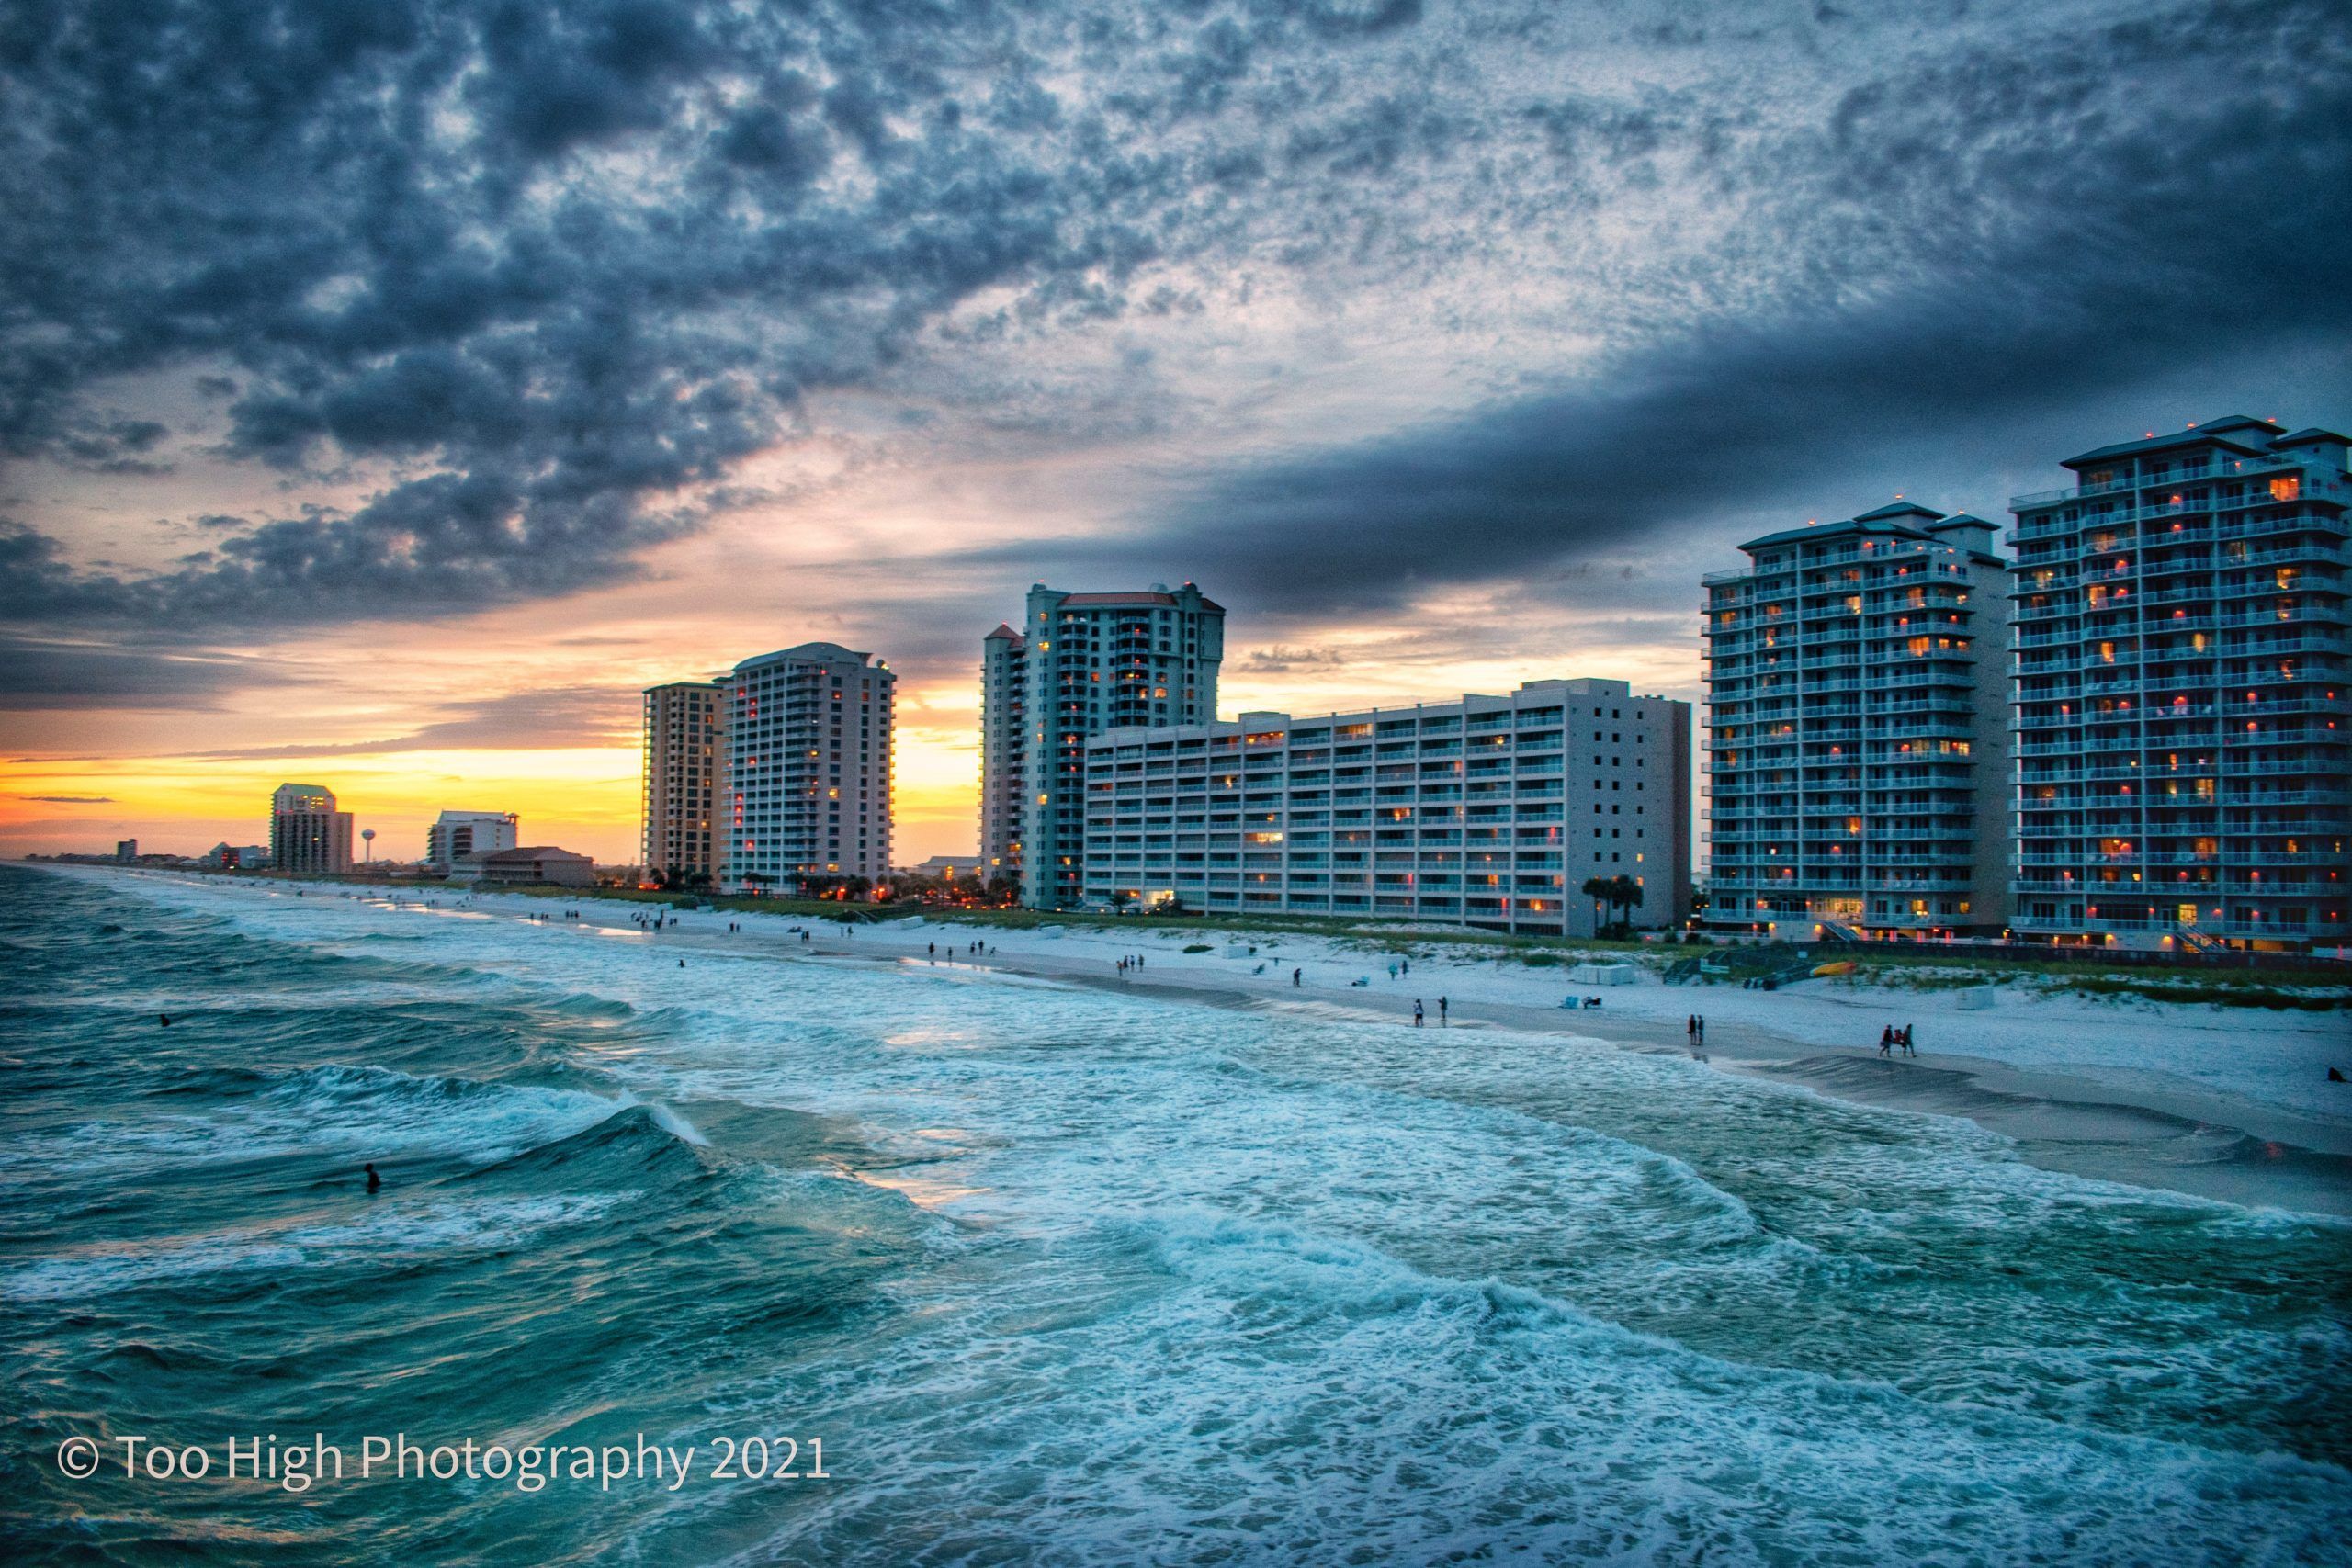 Today's Photo of the Day comes from Too High Photography and showcases Navarre Beach at sundown in a stunning fashion.